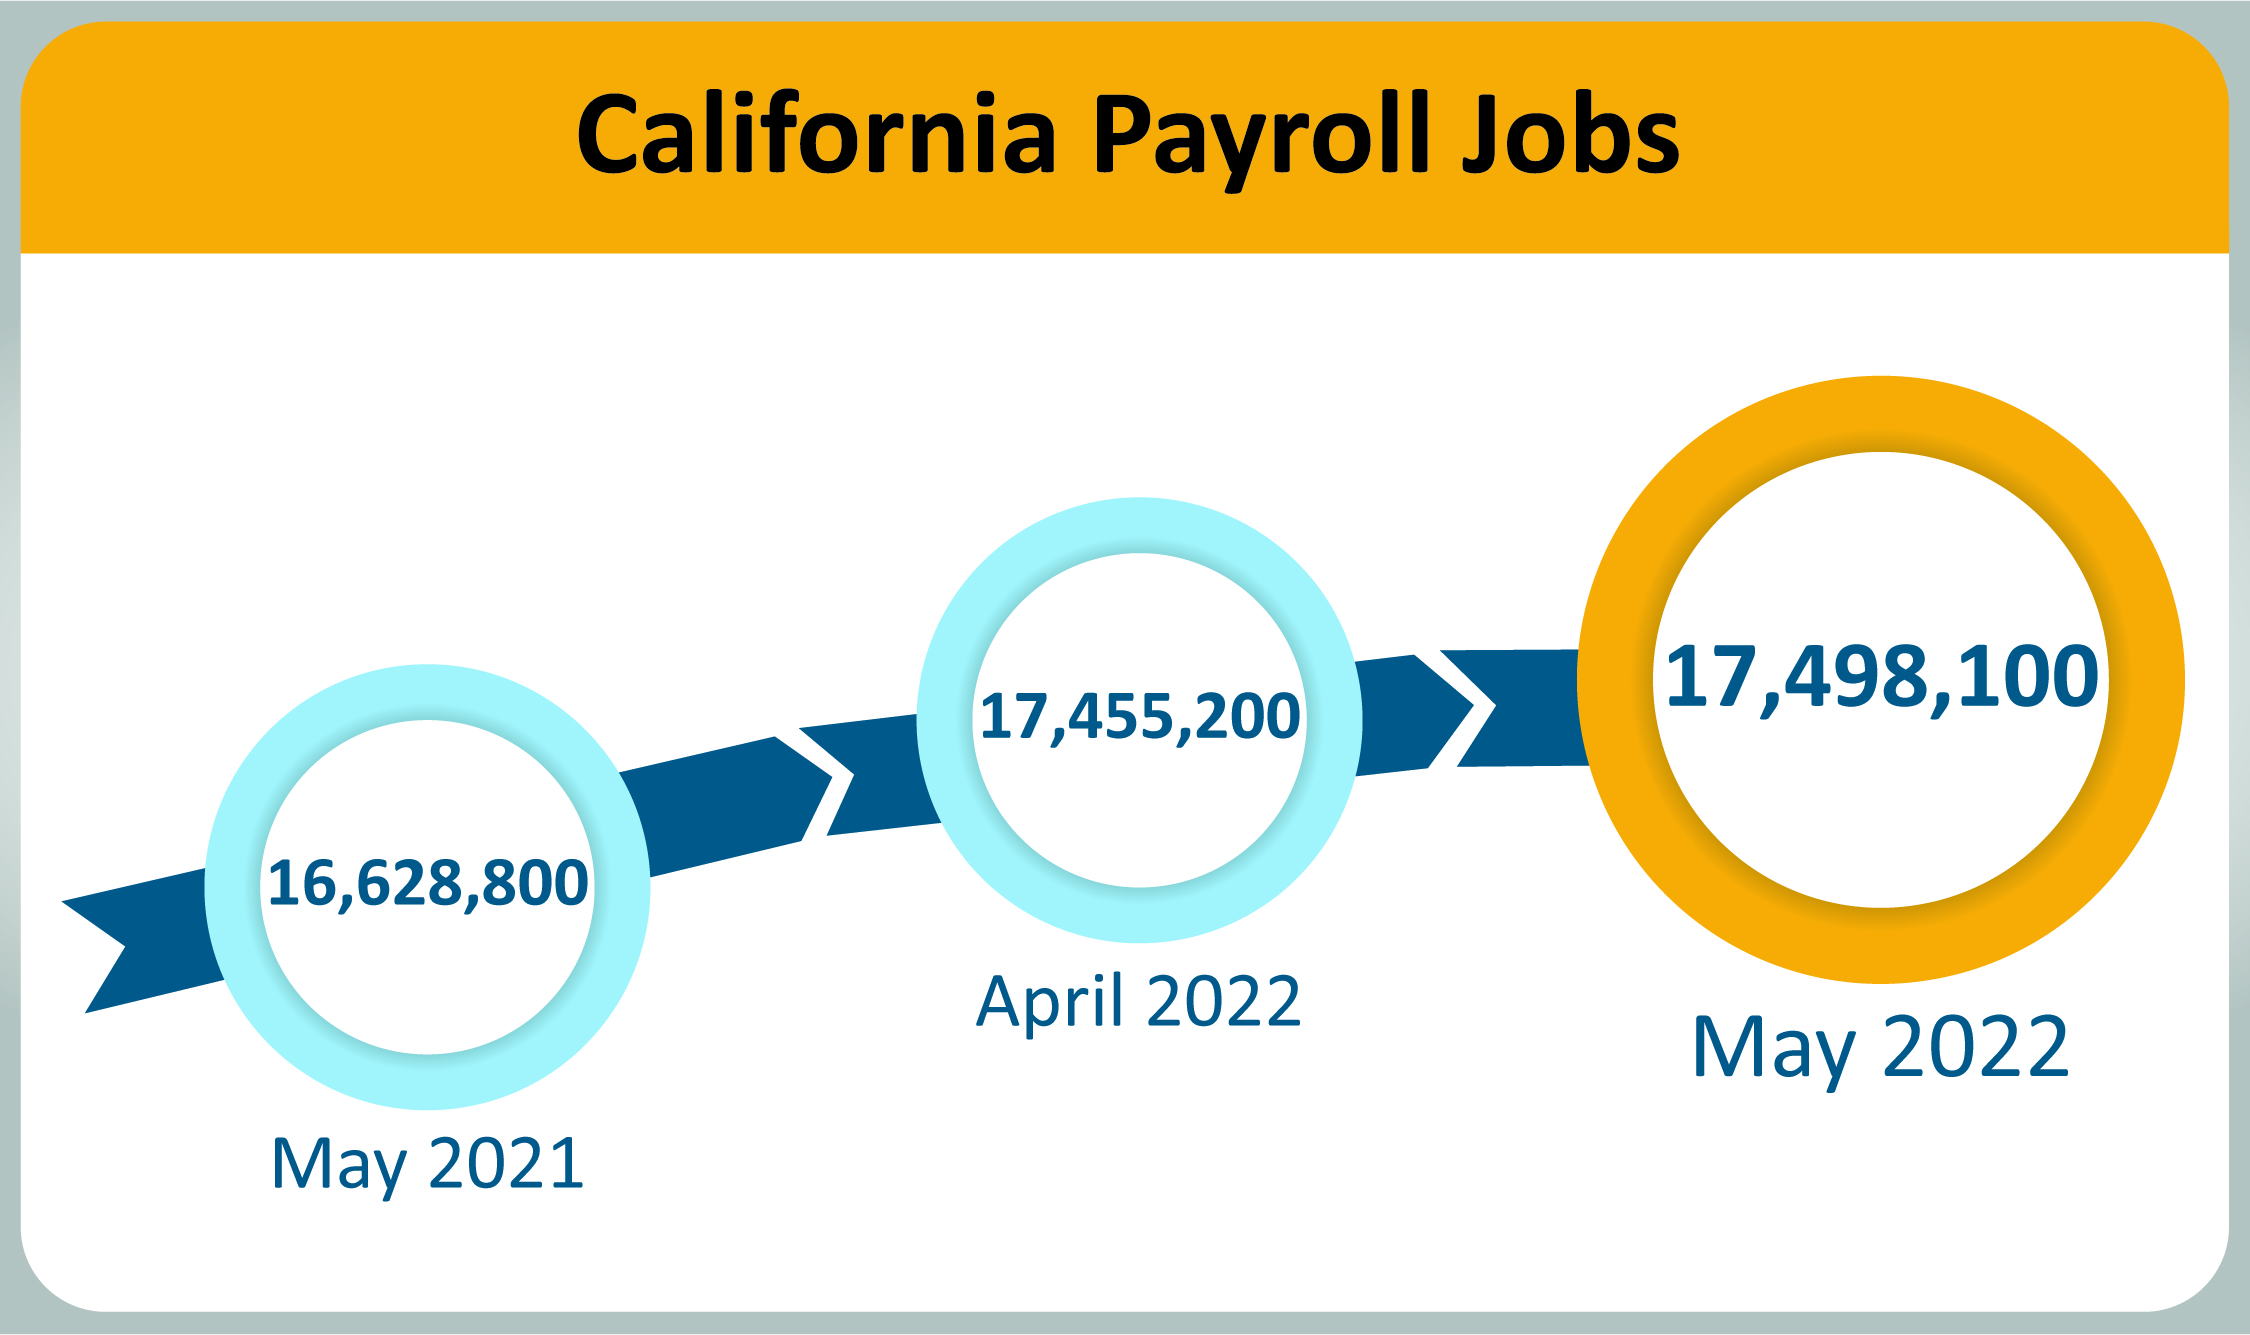 California payroll jobs totaled 17,498,100 in May 2022, up from 16,628,800 in May 2021.